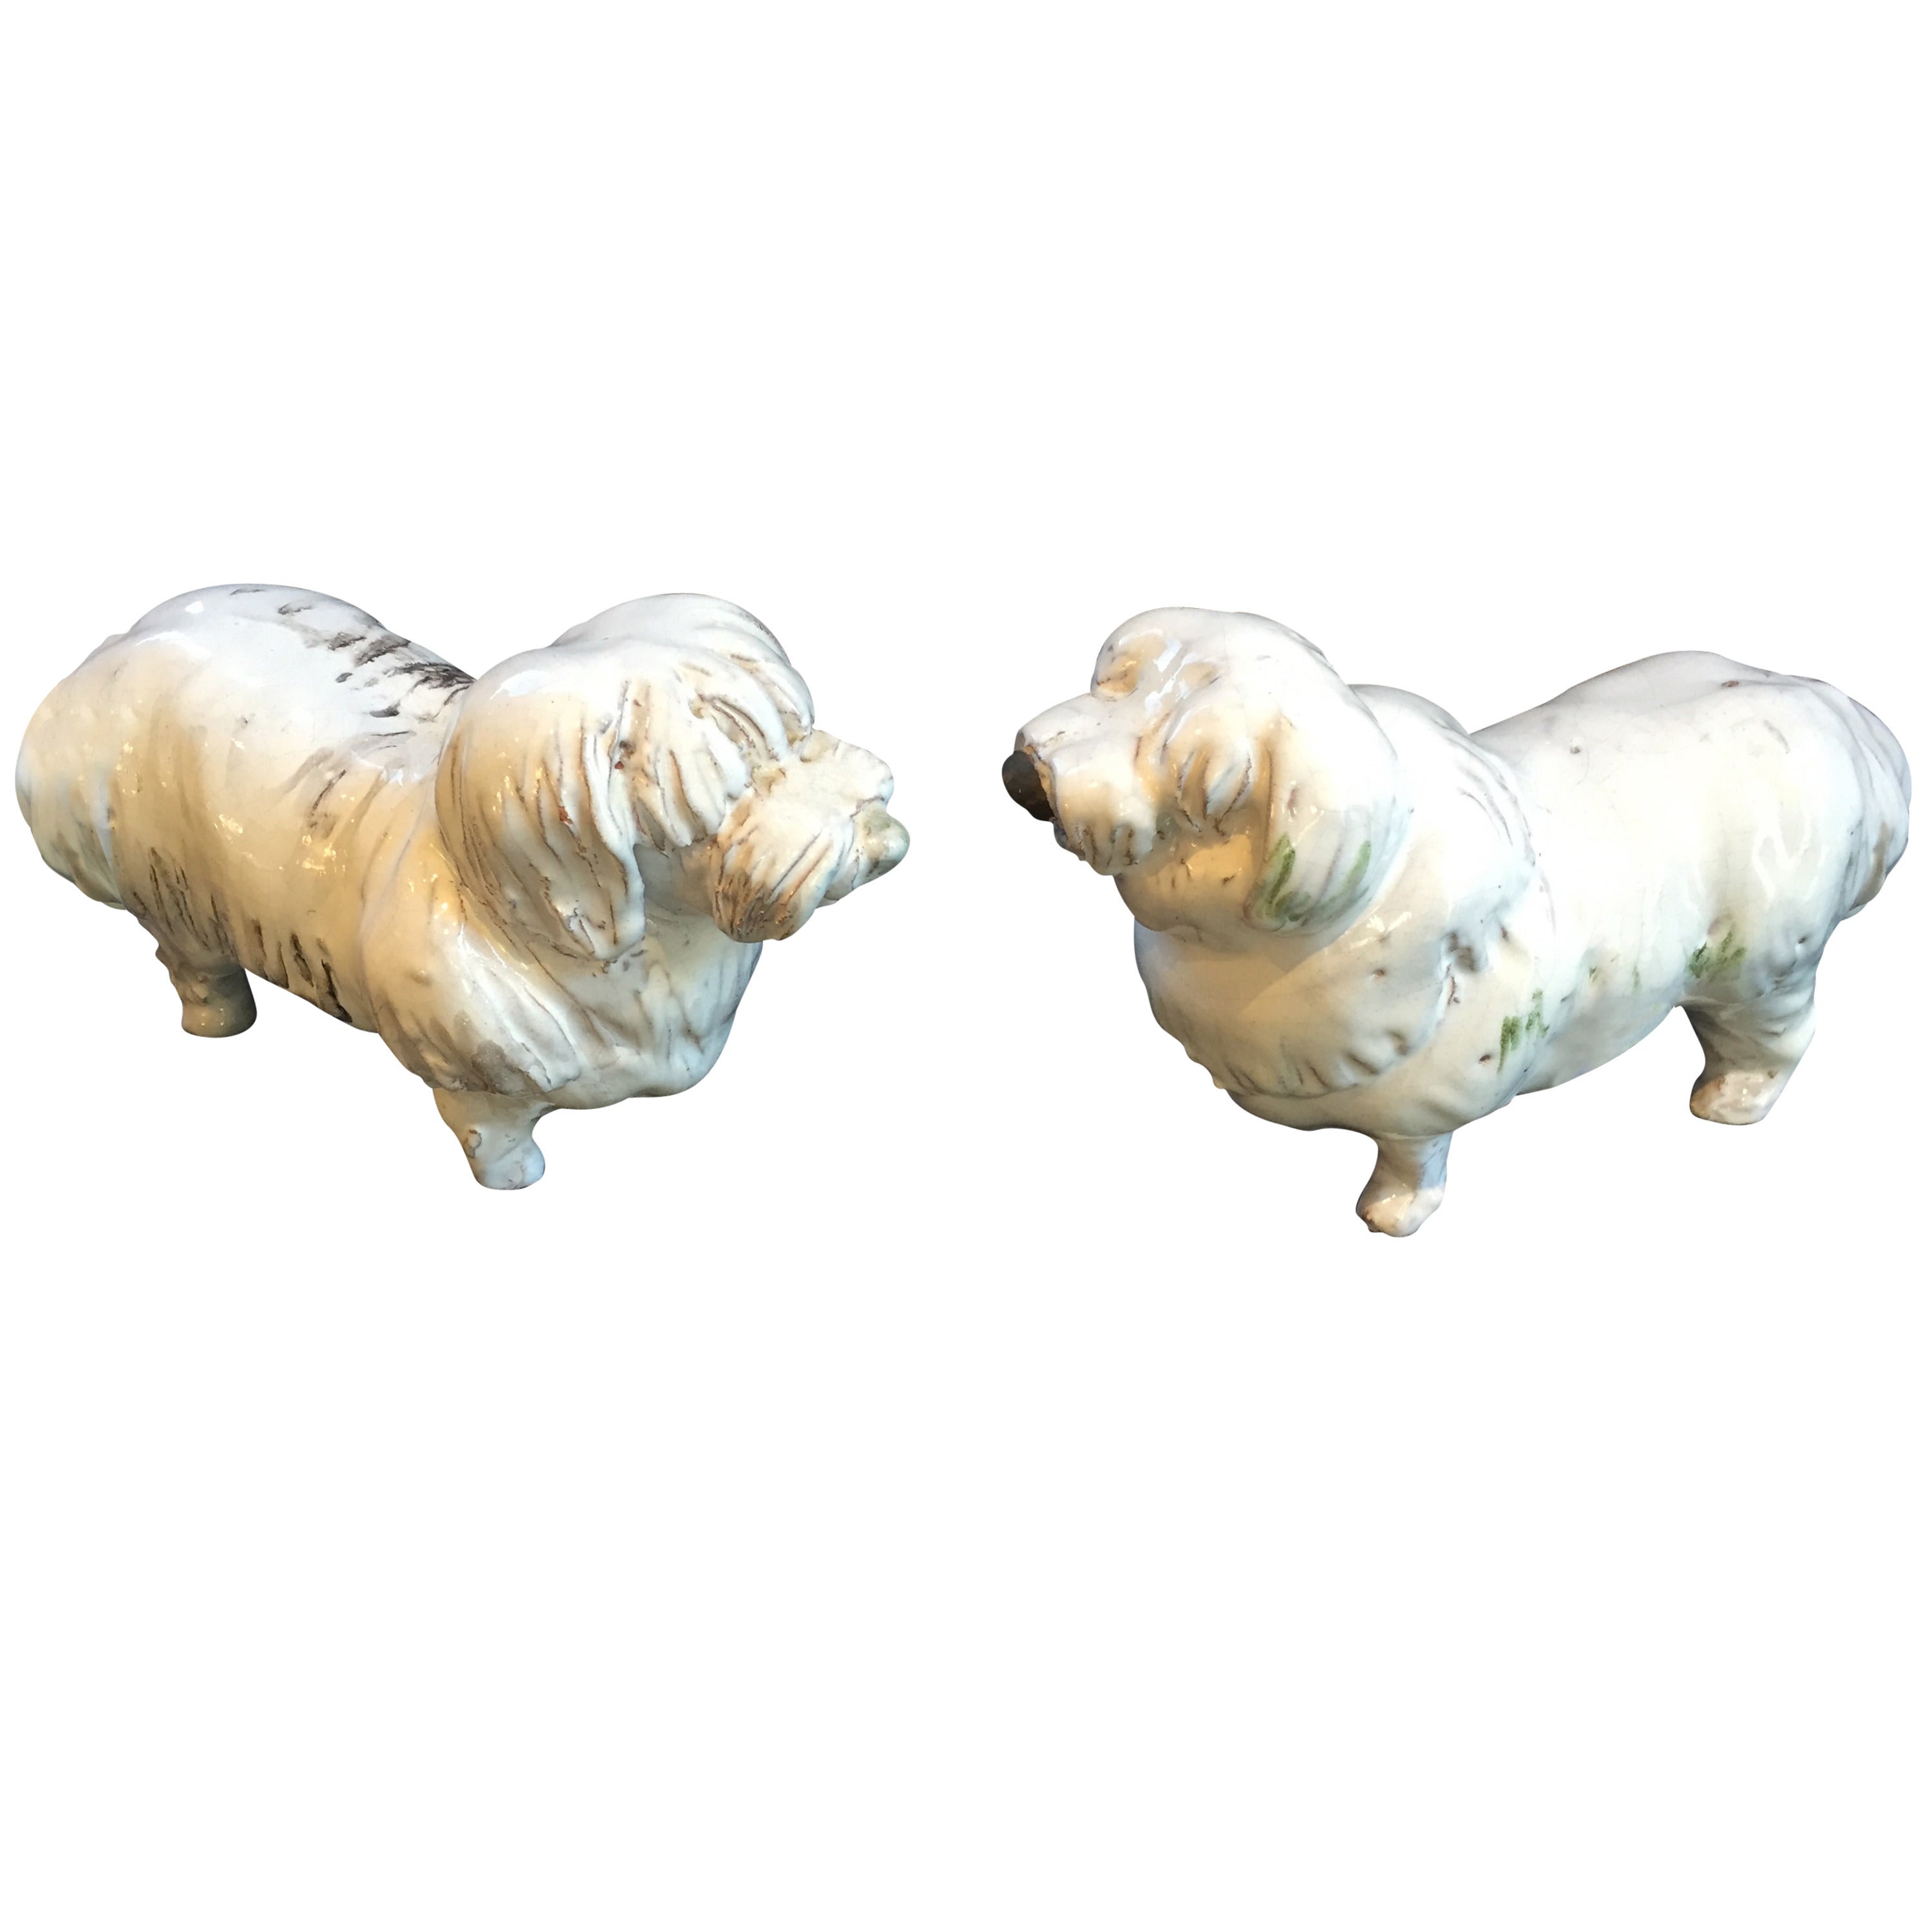 1930s-1950s Japanese White Pottery Sheep Dogs